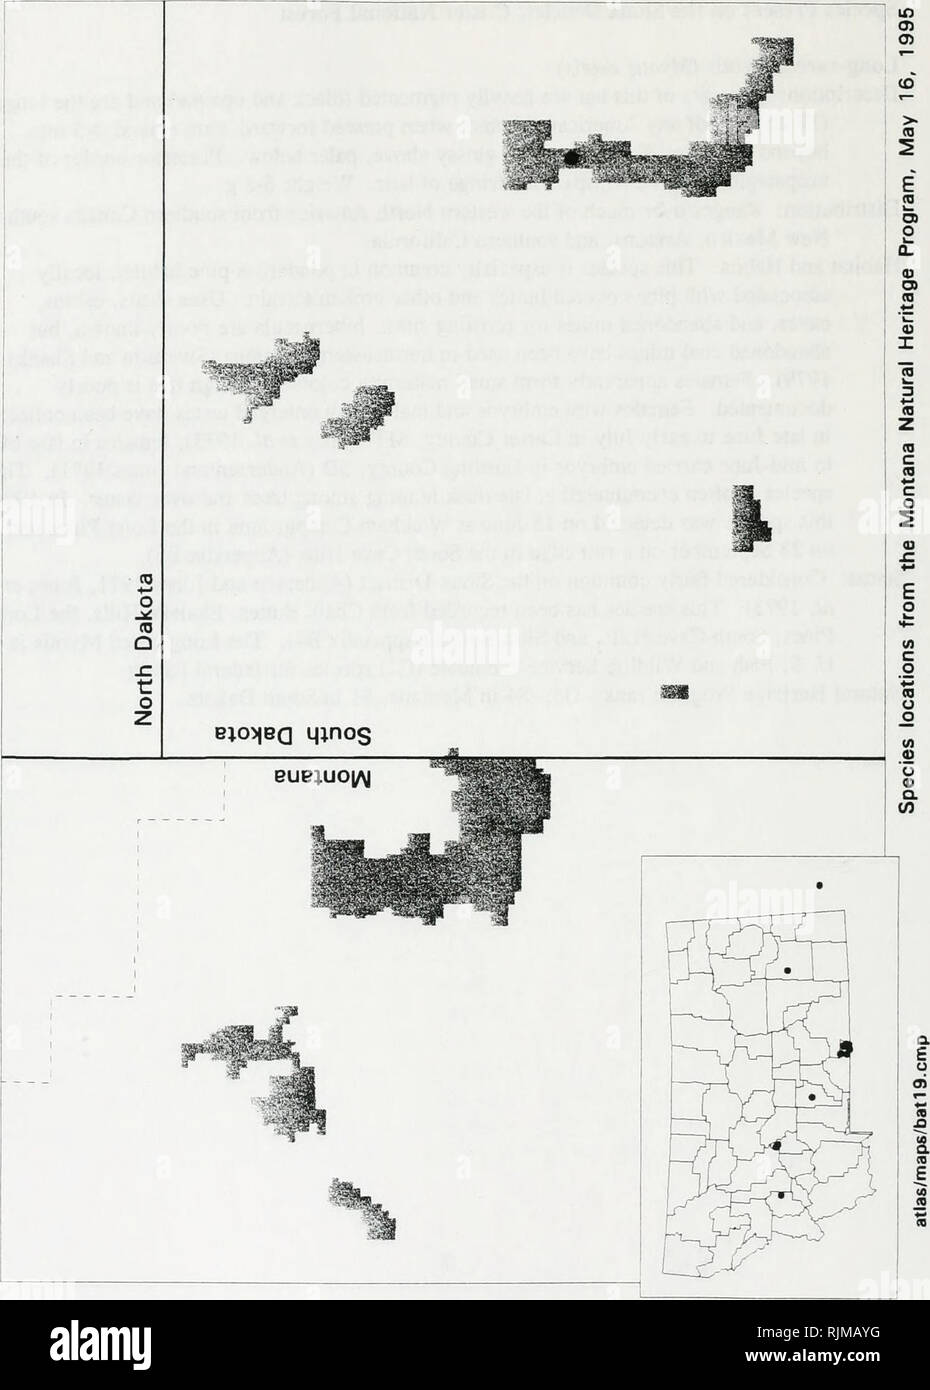 . Bat survey of the Sioux District, Custer National Forest : 1994 . Bats; Bats; Bats; Bats; Anabat bat detection systems; Bats; Bats; Long-eared myotis; Long-eared myotis; Western small-footed myotis; Western small-footed myotis; Long-legged myotis; Long-legged myotis; Fringed myotis; Fringed myotis; Big brown bat; Big brown bat; Silver-haired bat; Silver-haired bat; Hoary bat; Hoary bat; Plecotus townsendii; Plecotus townsendii; Mist netting. (0 c g Z i  Q X D g c o Â£ iâ -Q o o (0 'â M o CO &lt;n o c &lt;D k- iâ 3 O O O. Please note that these images are extracted from scanned page images th Stock Photo